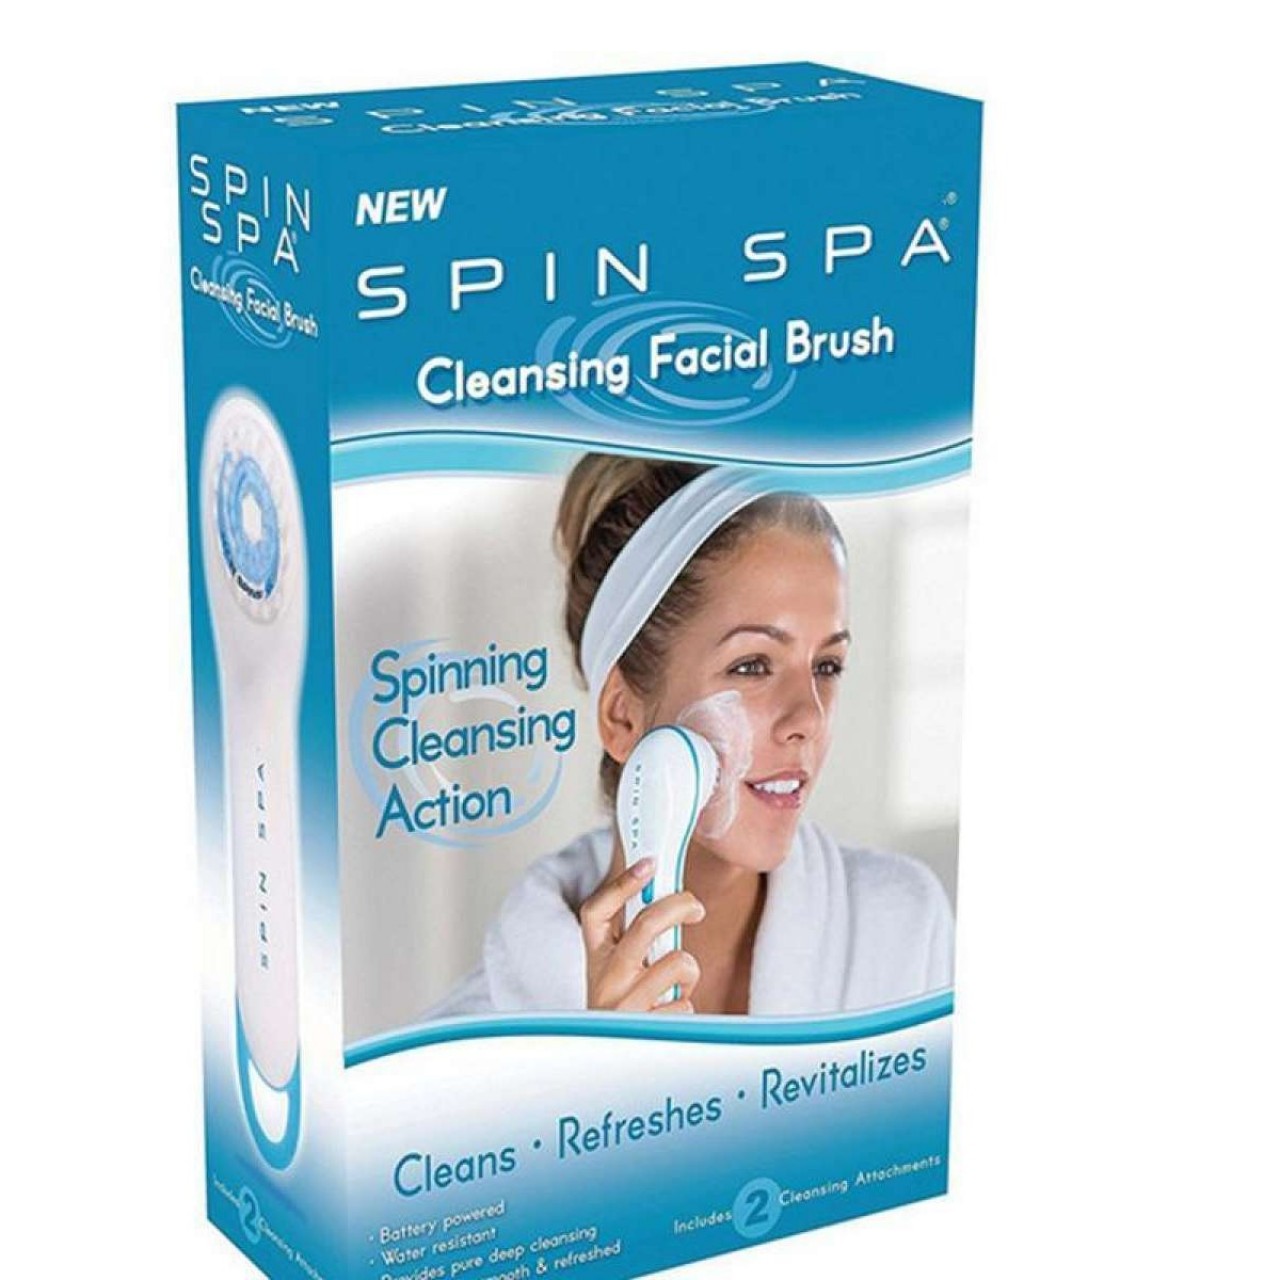 Spin Spa Cleansing Facial Brush